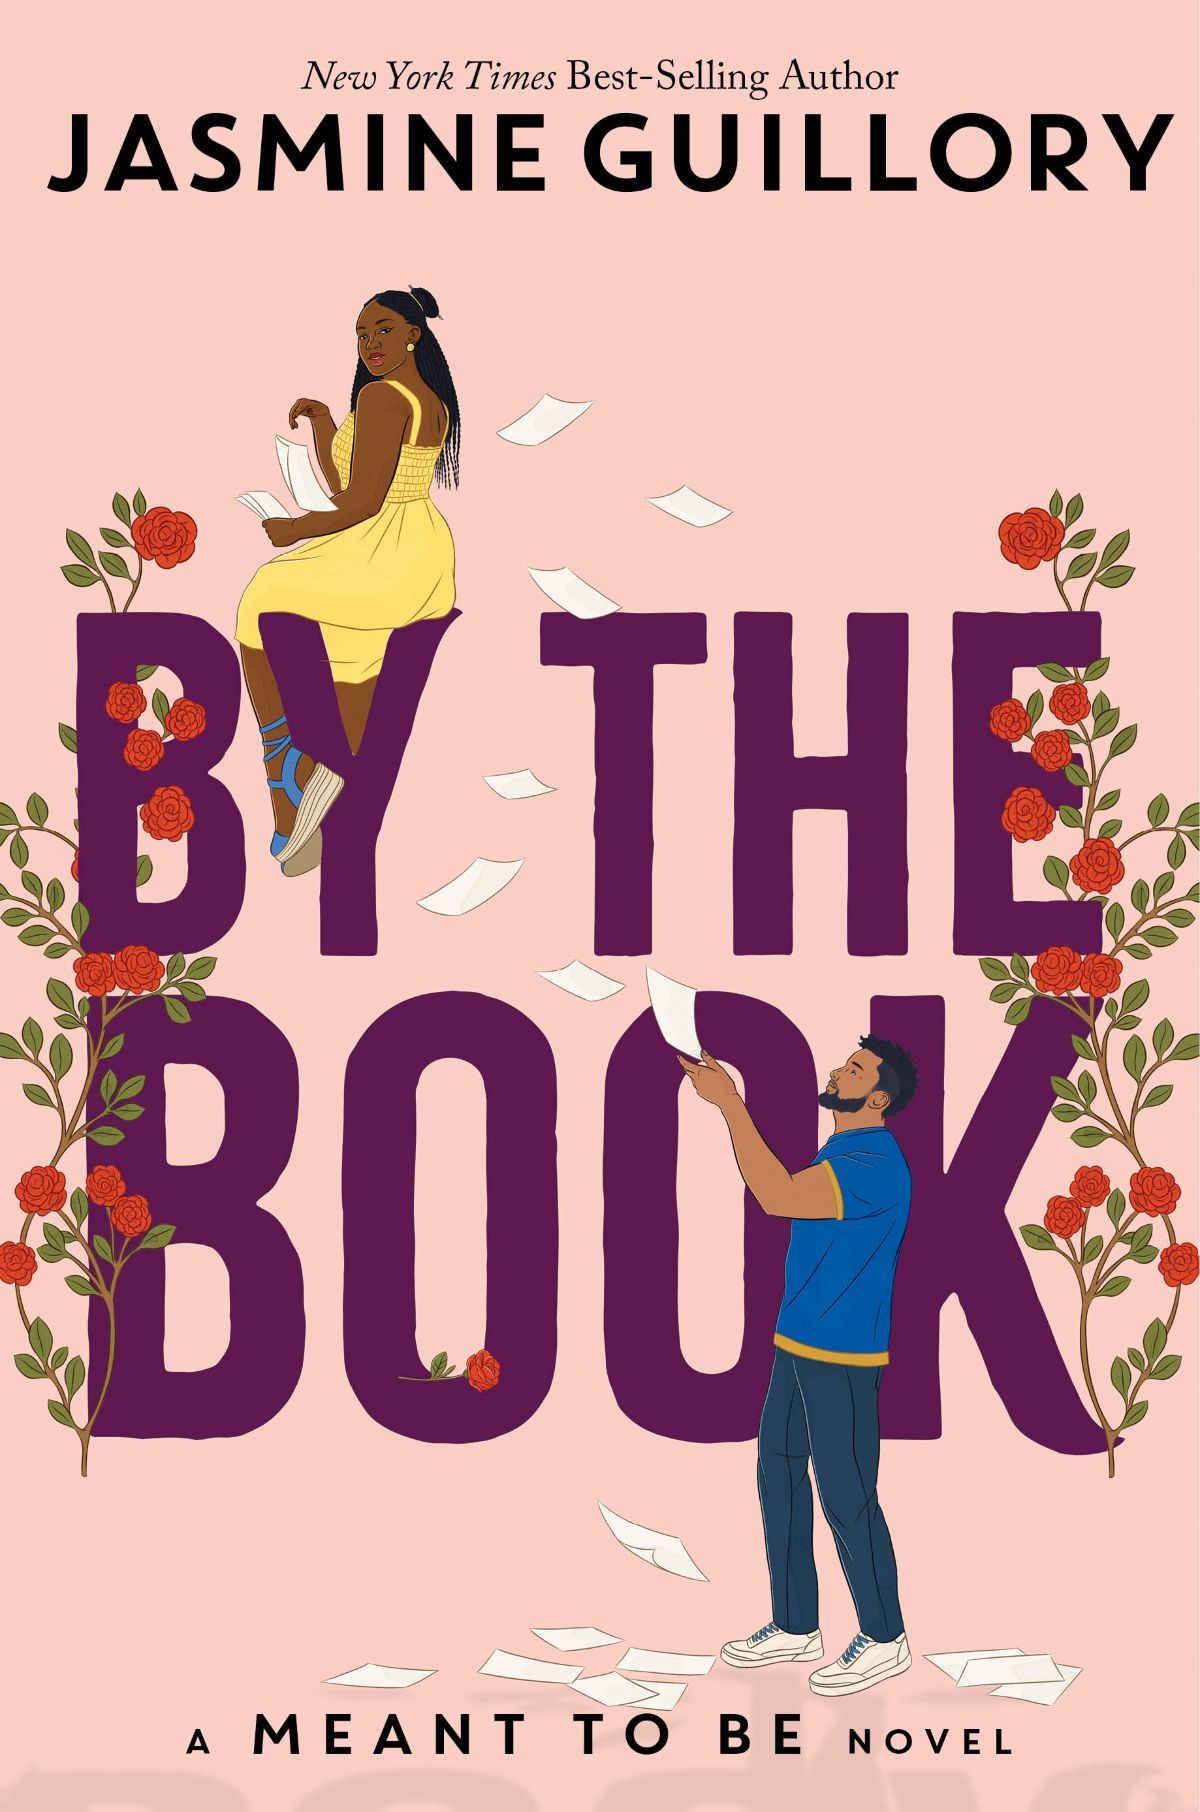 Cover image of "By the Book" by Jasmine Guillory.